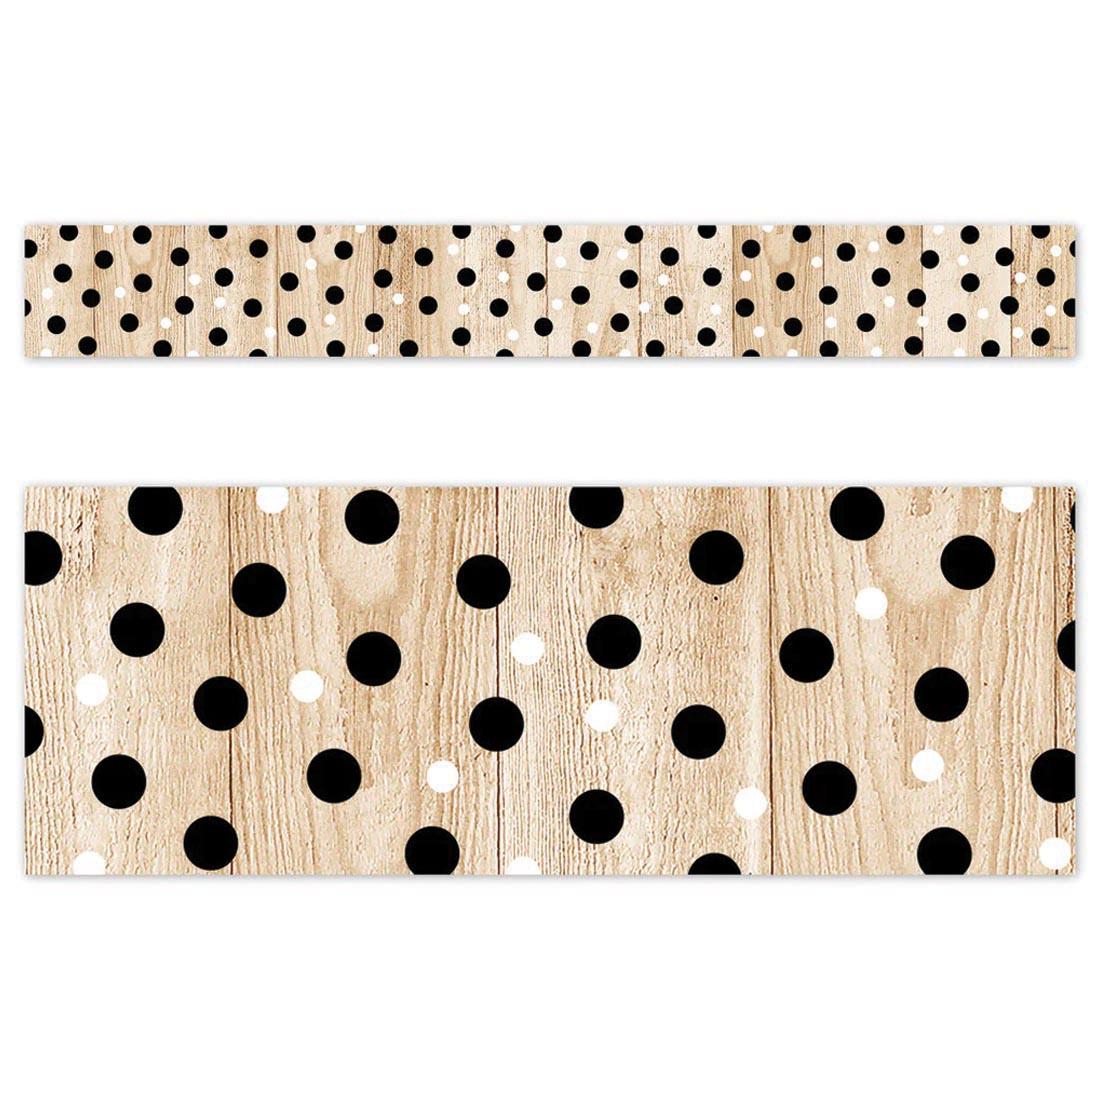 Closeup and full strip of Polka Dots on Wood EZ Border from the Core Decor collection by Creative Teaching Press